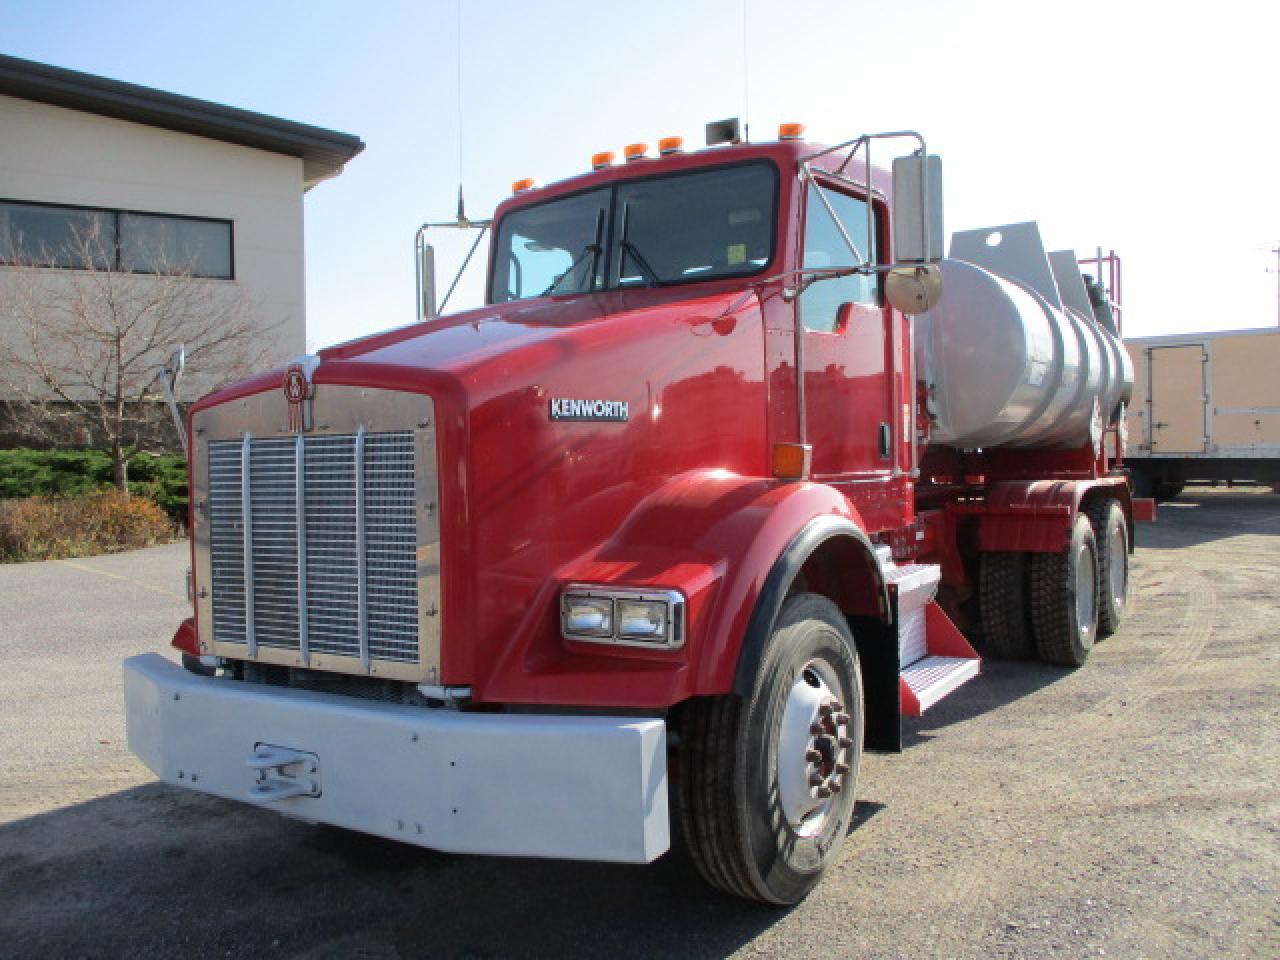 Used 2007 KENWORTH T800 For Sale in Caledonia, NY 14423 Grape 4.9